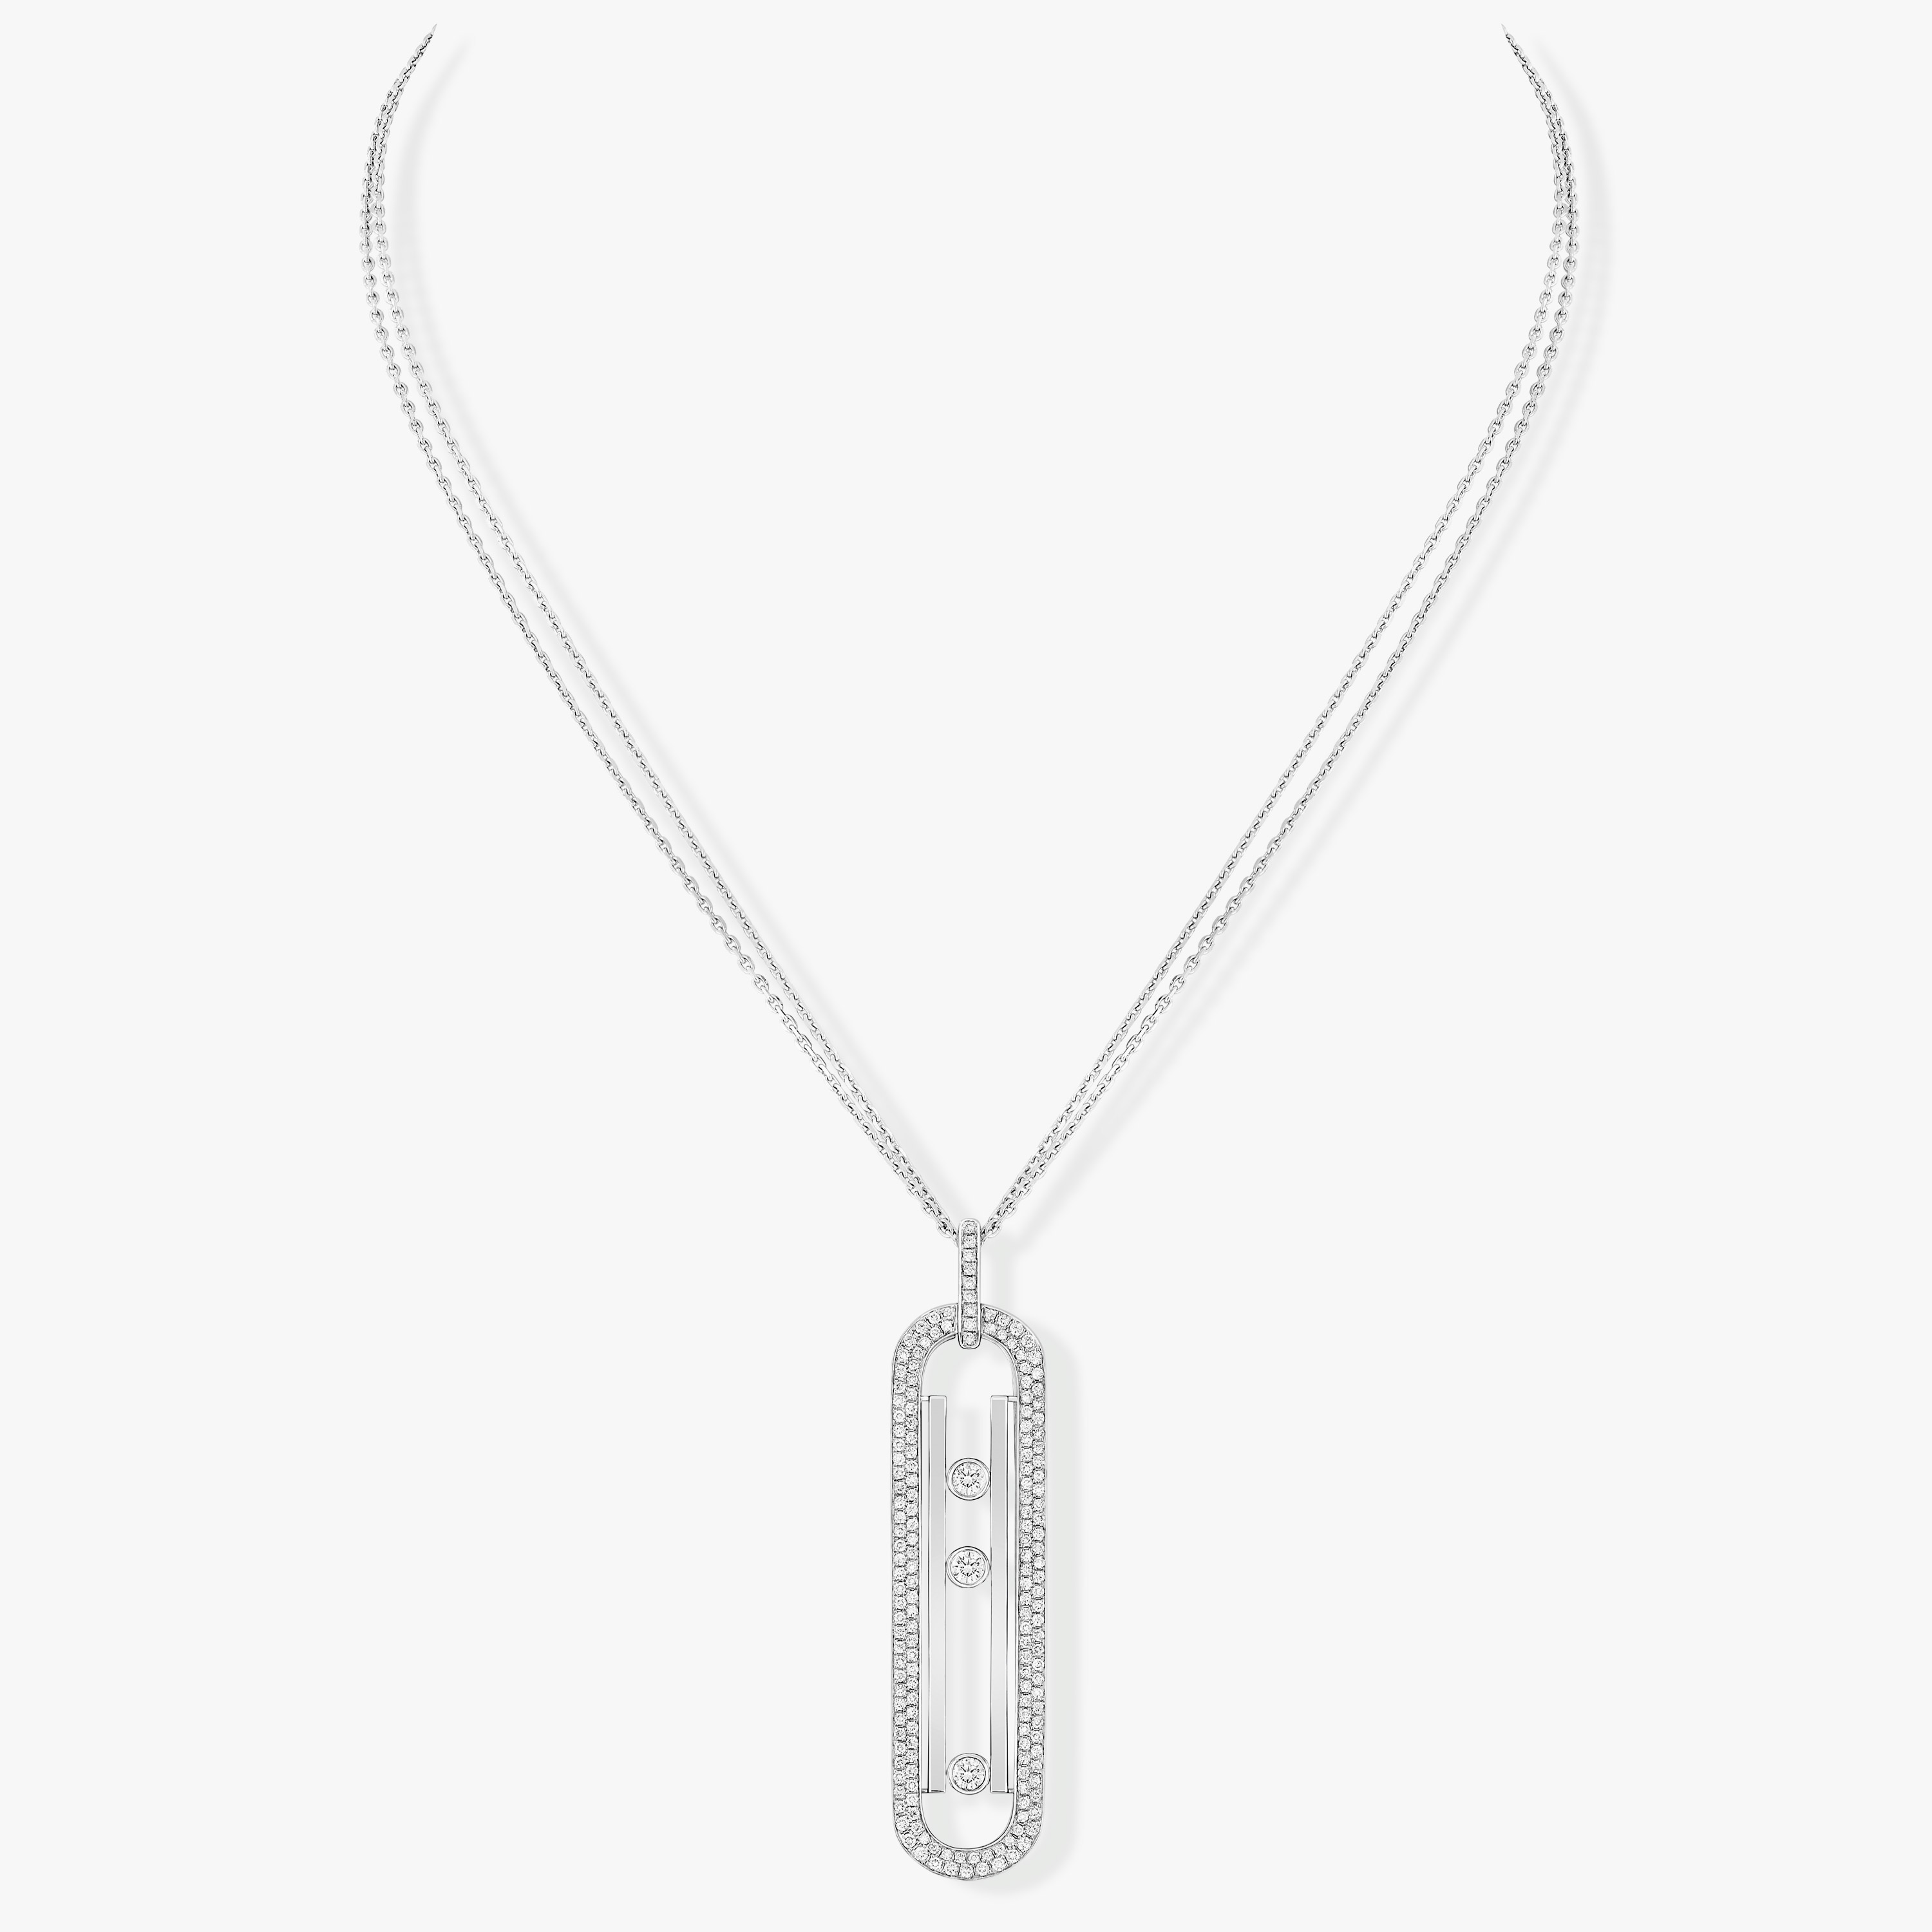 Move 10th Anniversary White Gold For Her Diamond Necklace 07228-WG